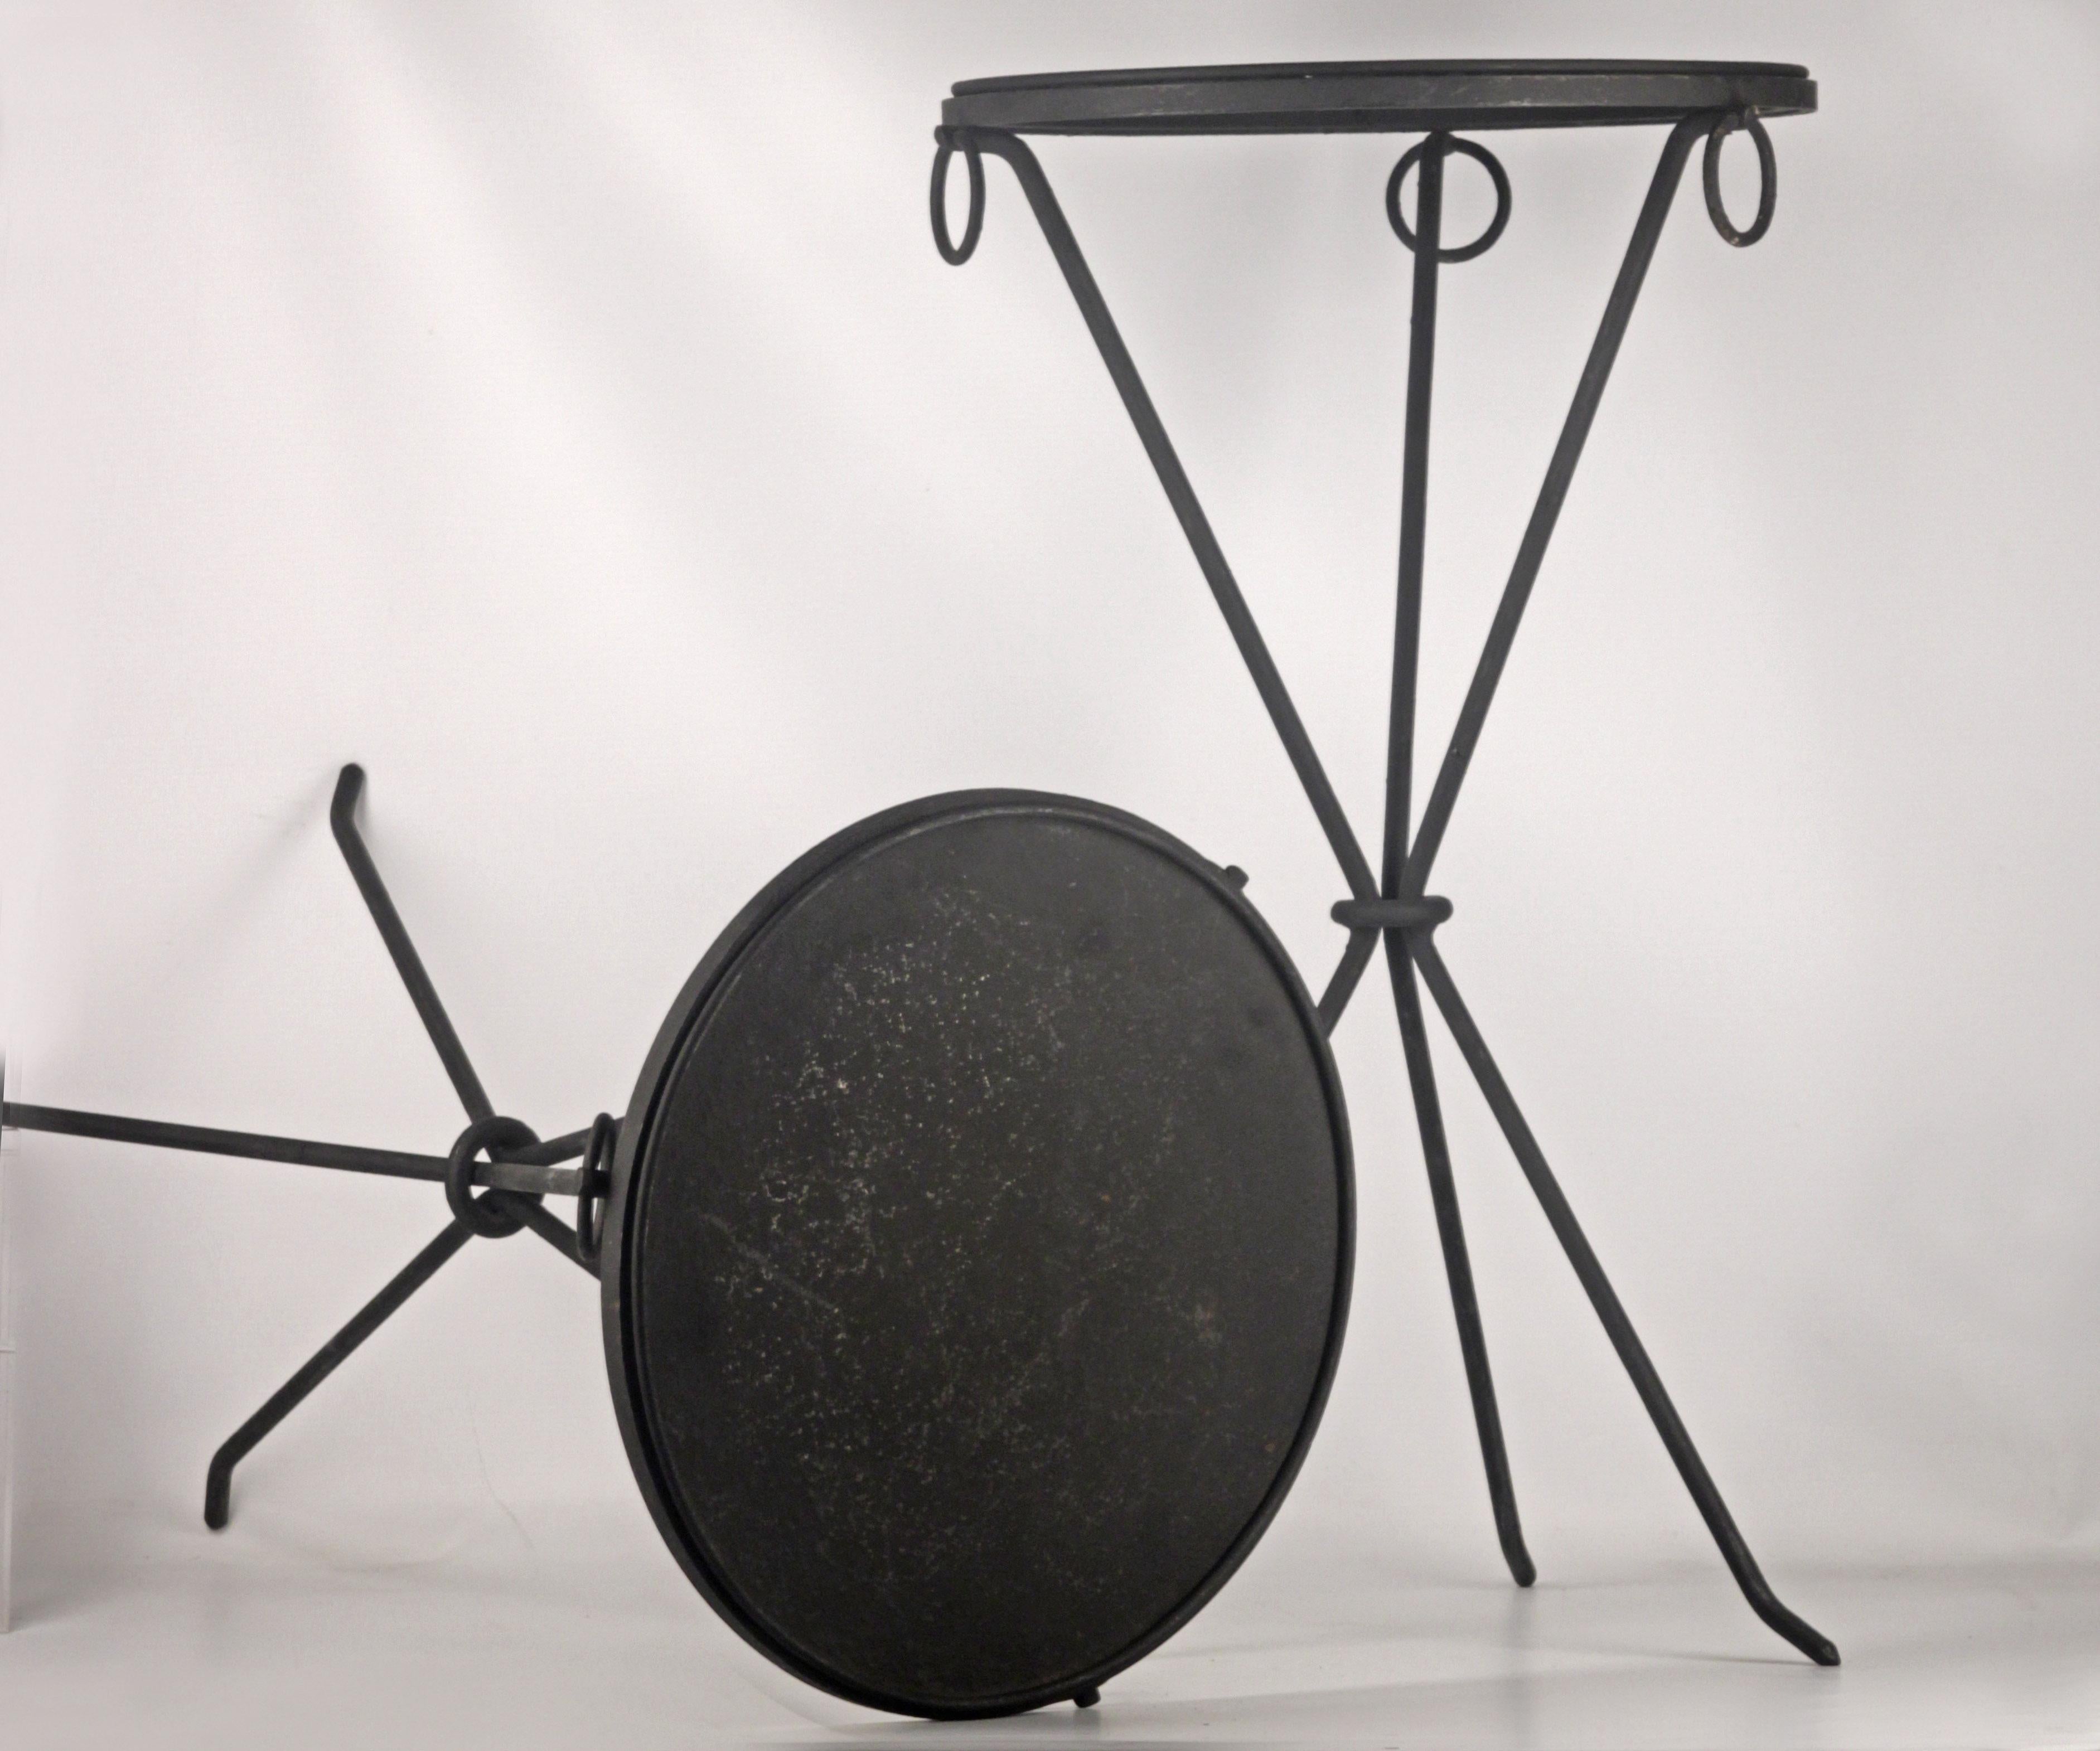 Art Deco Pair of Mid-20th Century Iron Guéridons Tables by Jean Michel-Frank for Comte